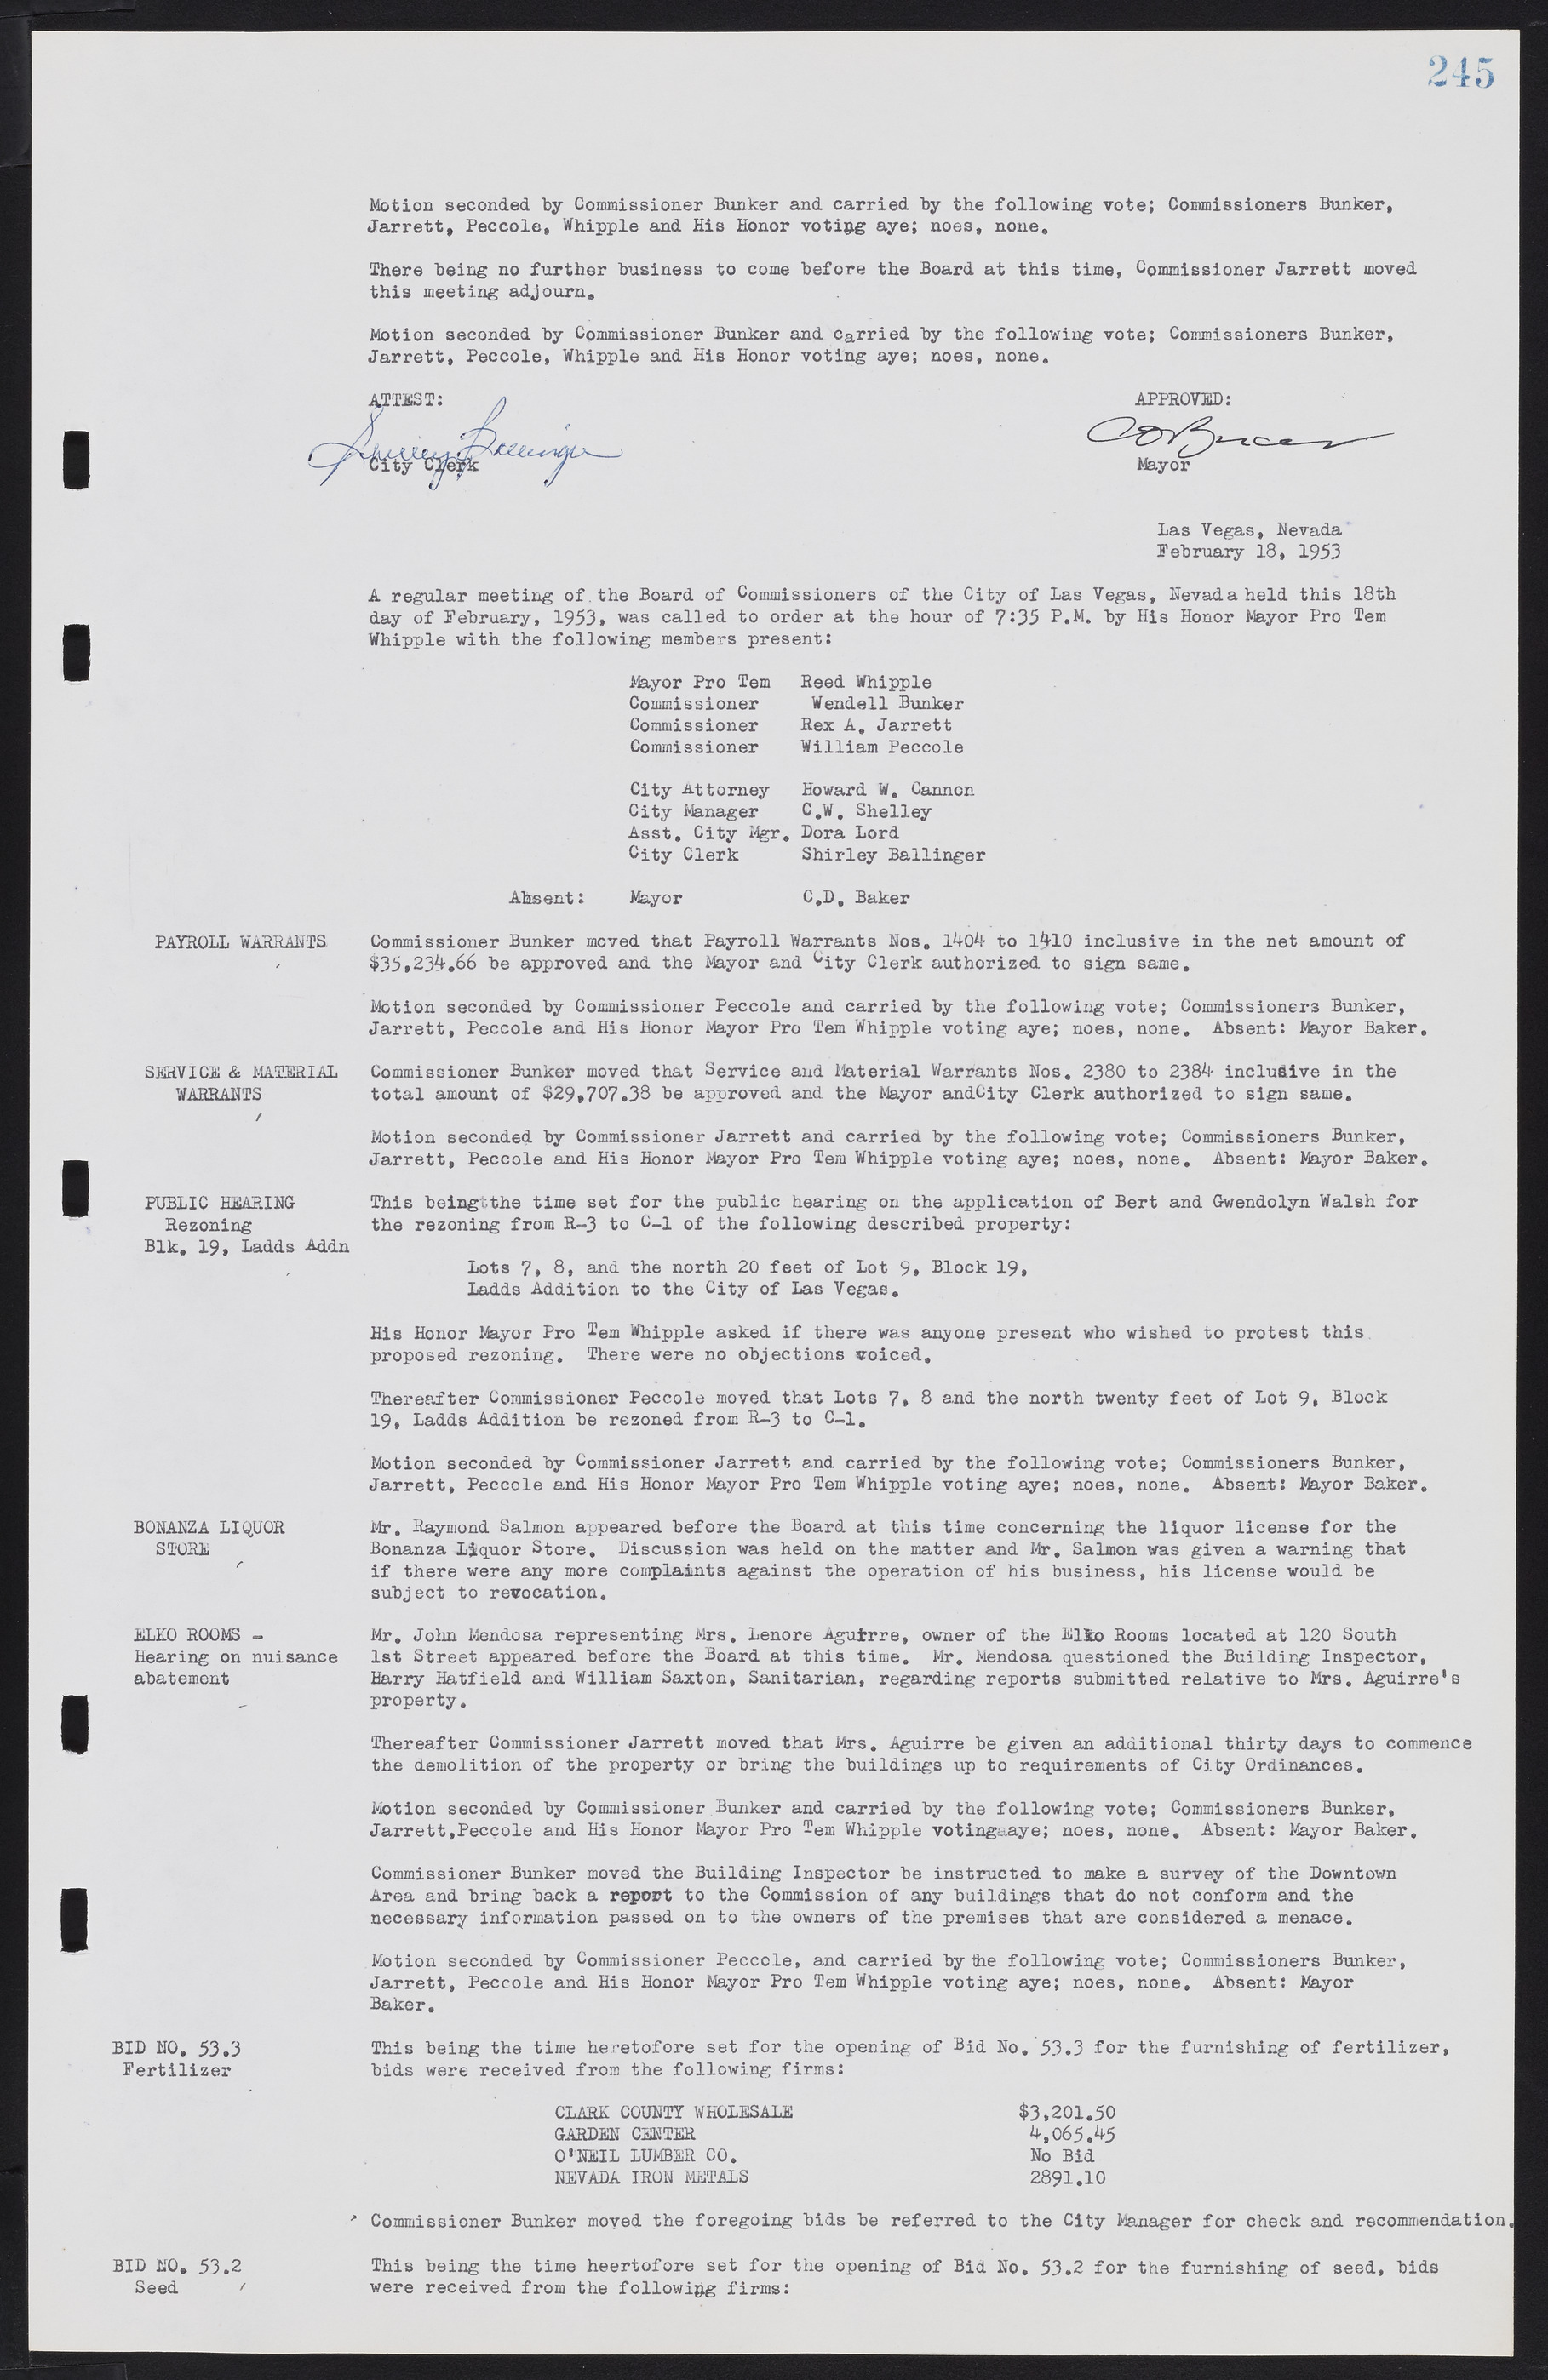 Las Vegas City Commission Minutes, May 26, 1952 to February 17, 1954, lvc000008-261